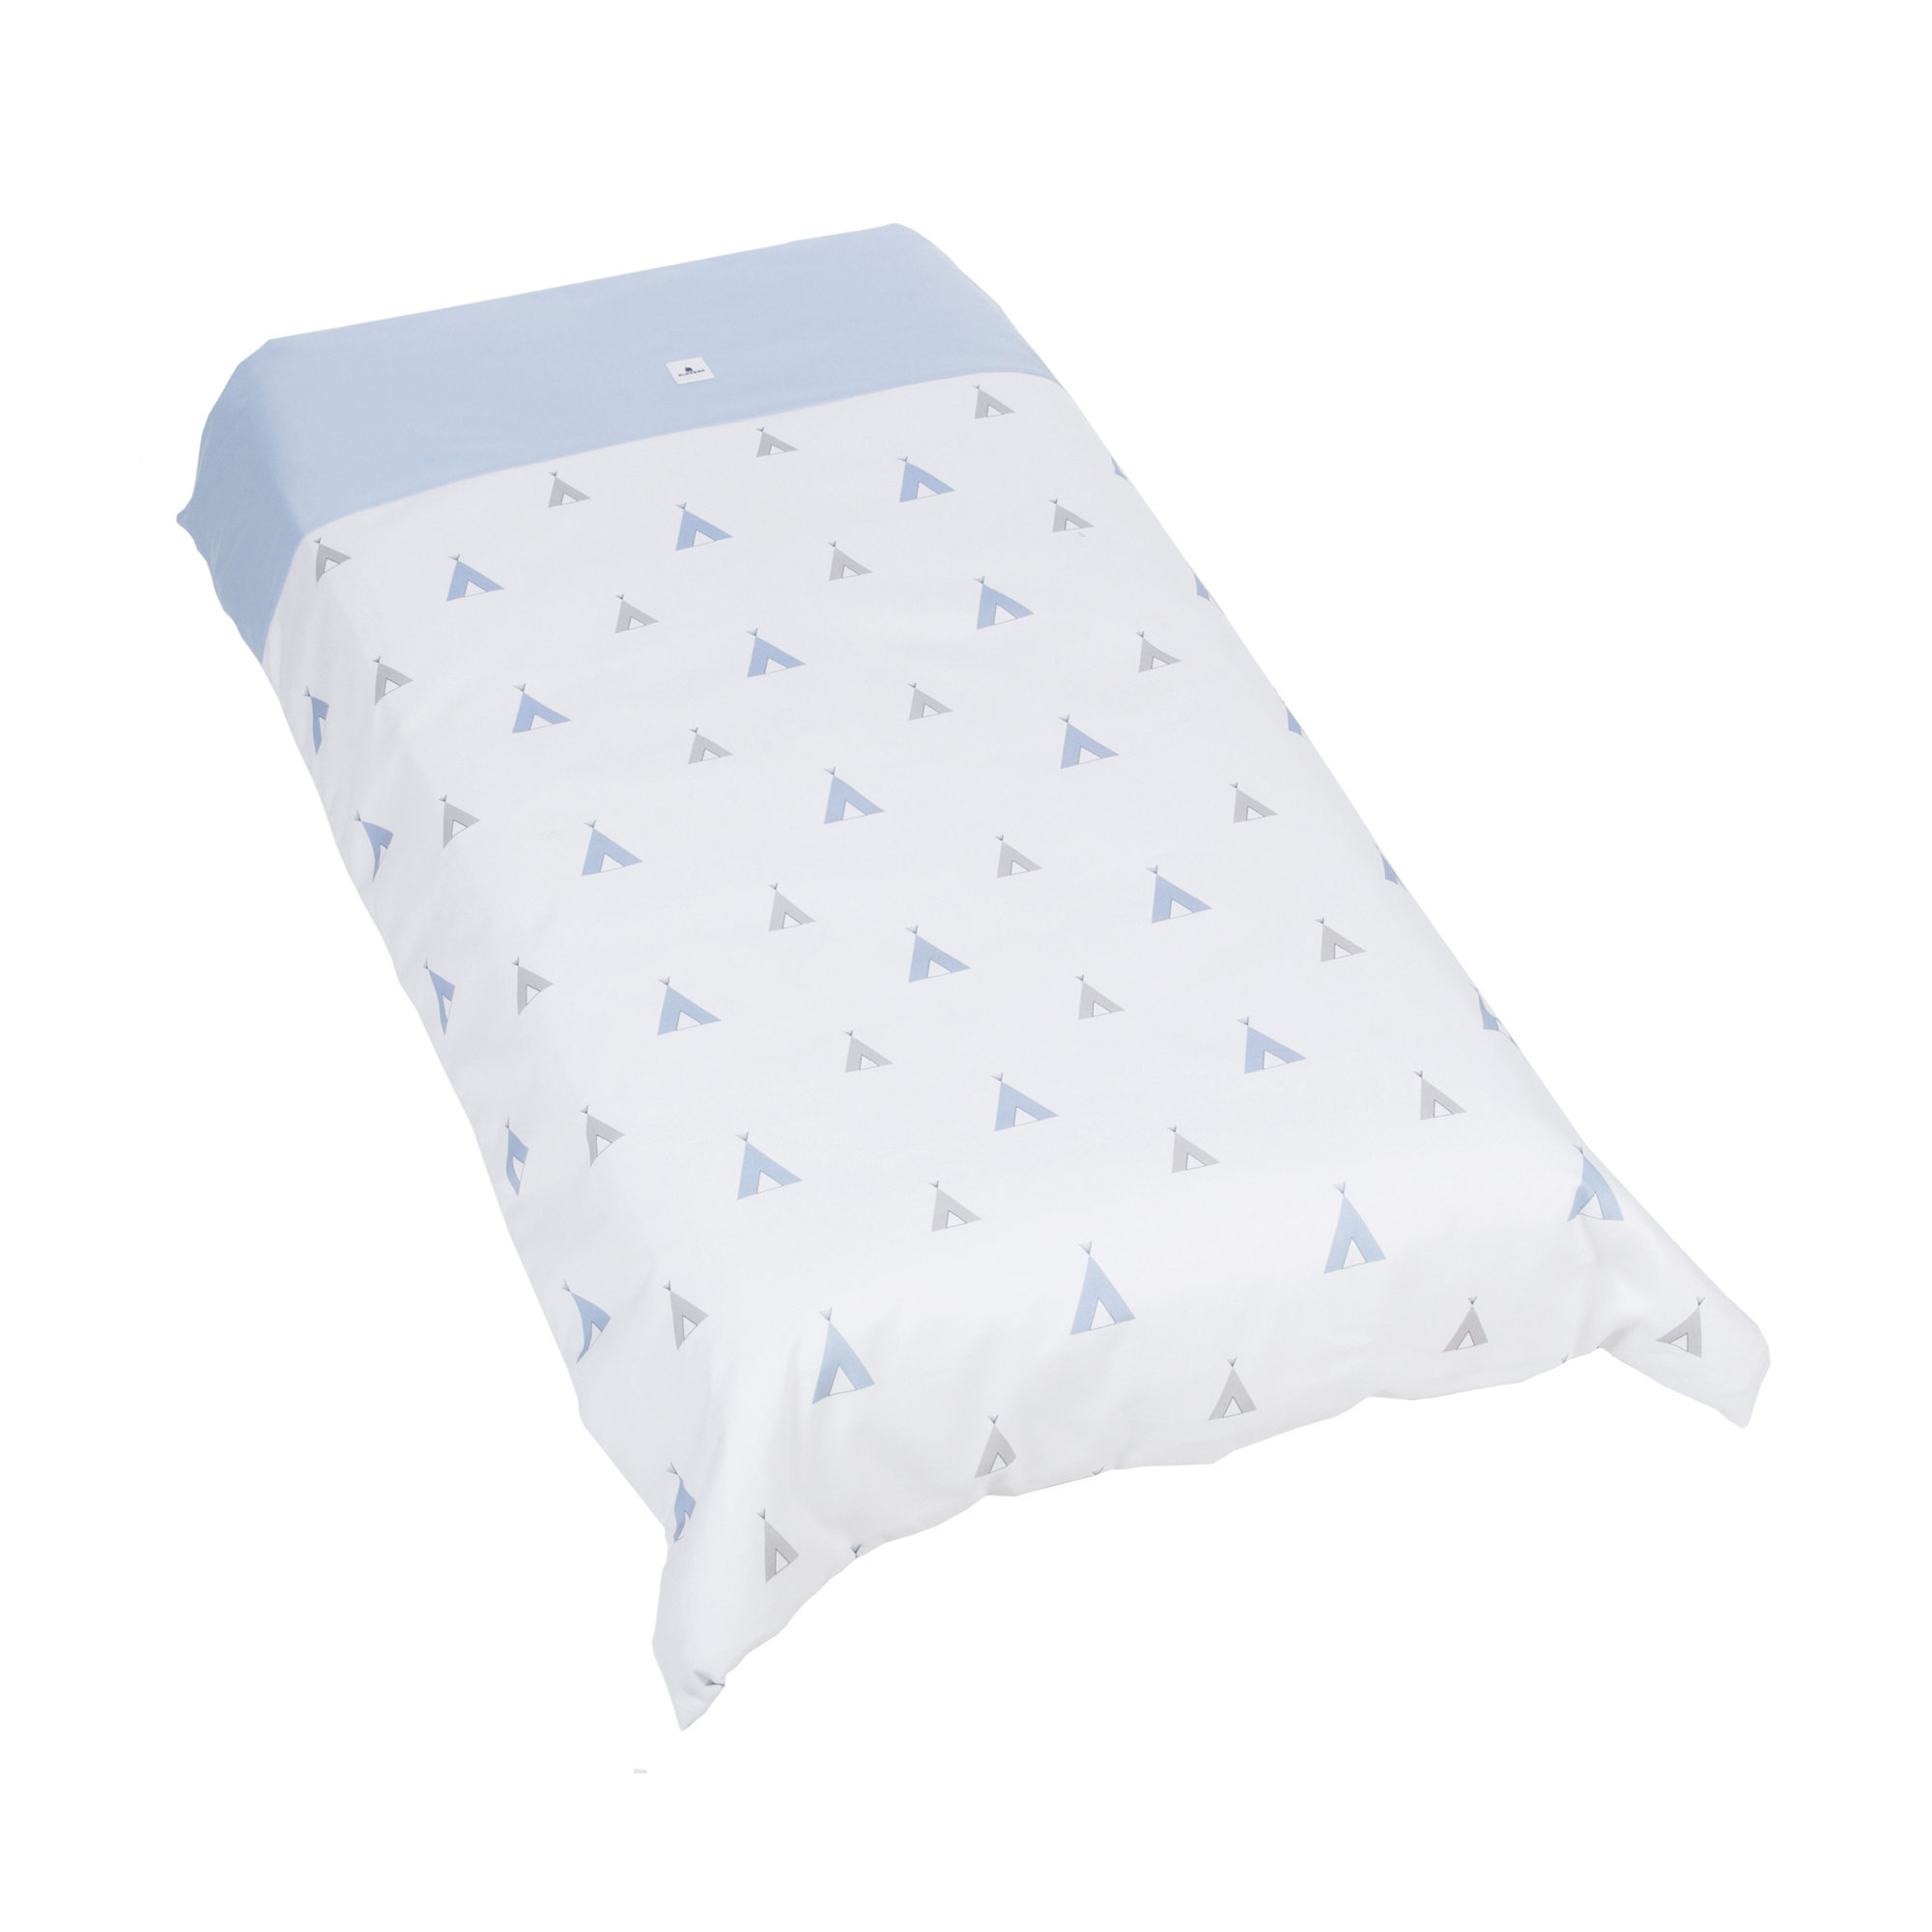 Cot duvet 70x140cm with removable filling